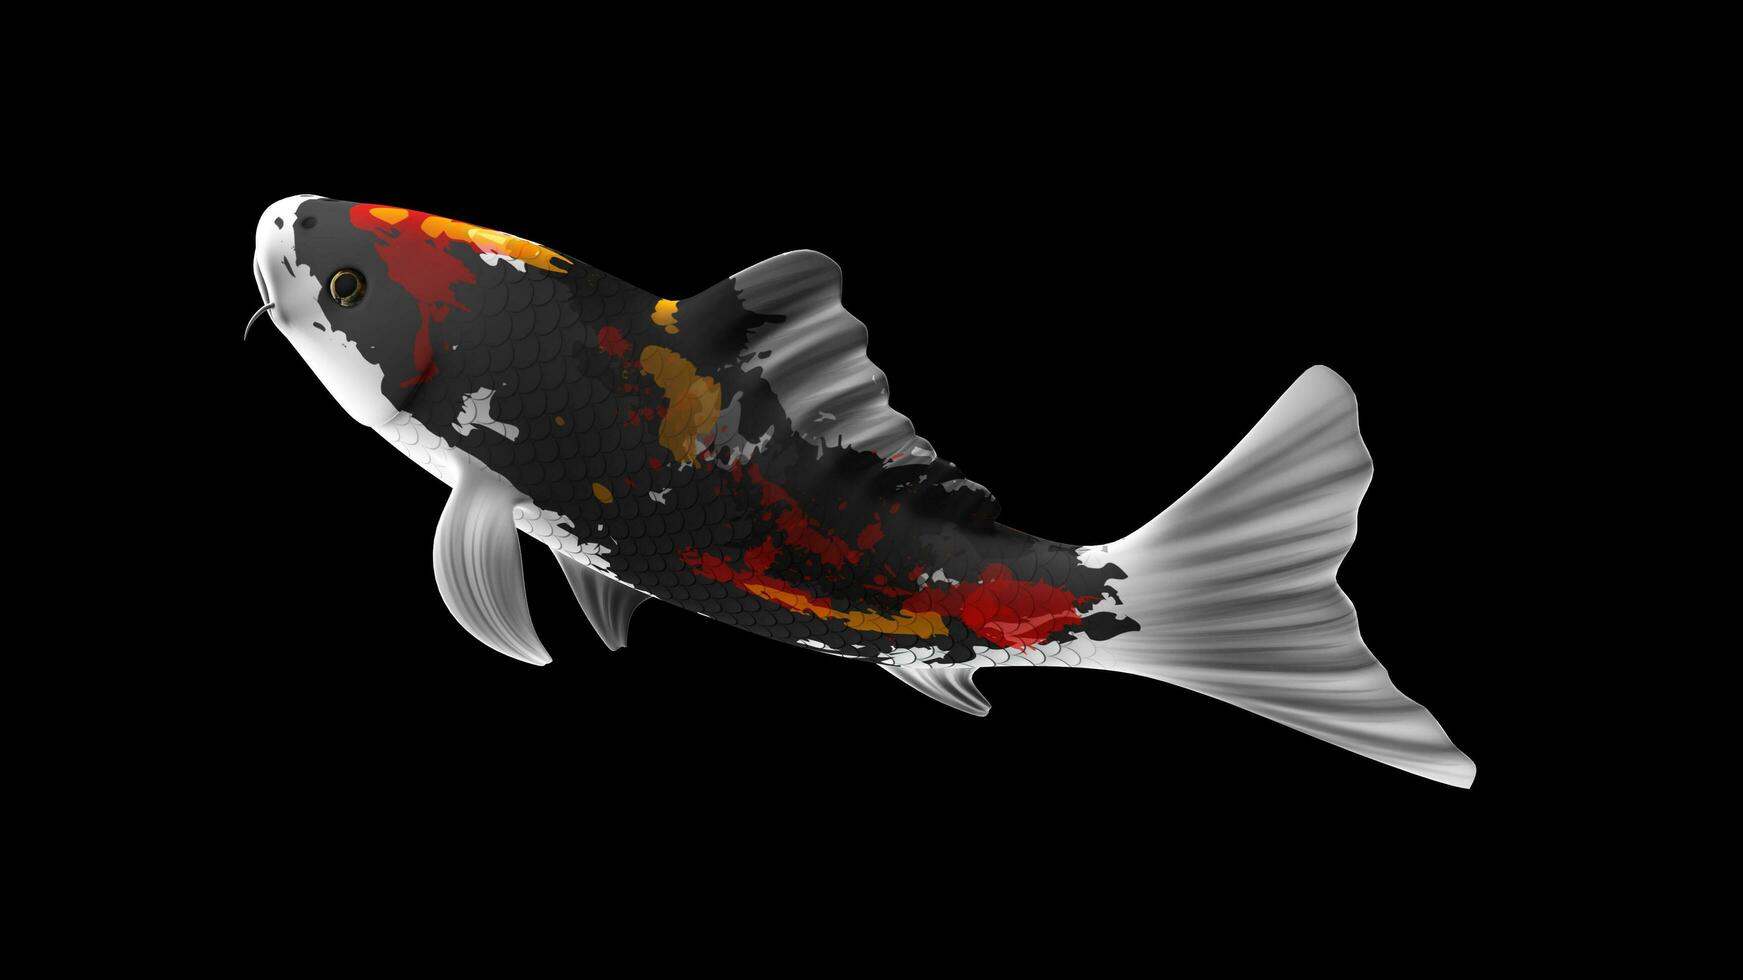 Single Black, Red and White Color Koi Fish 3D Rendering Japanese Carp photo